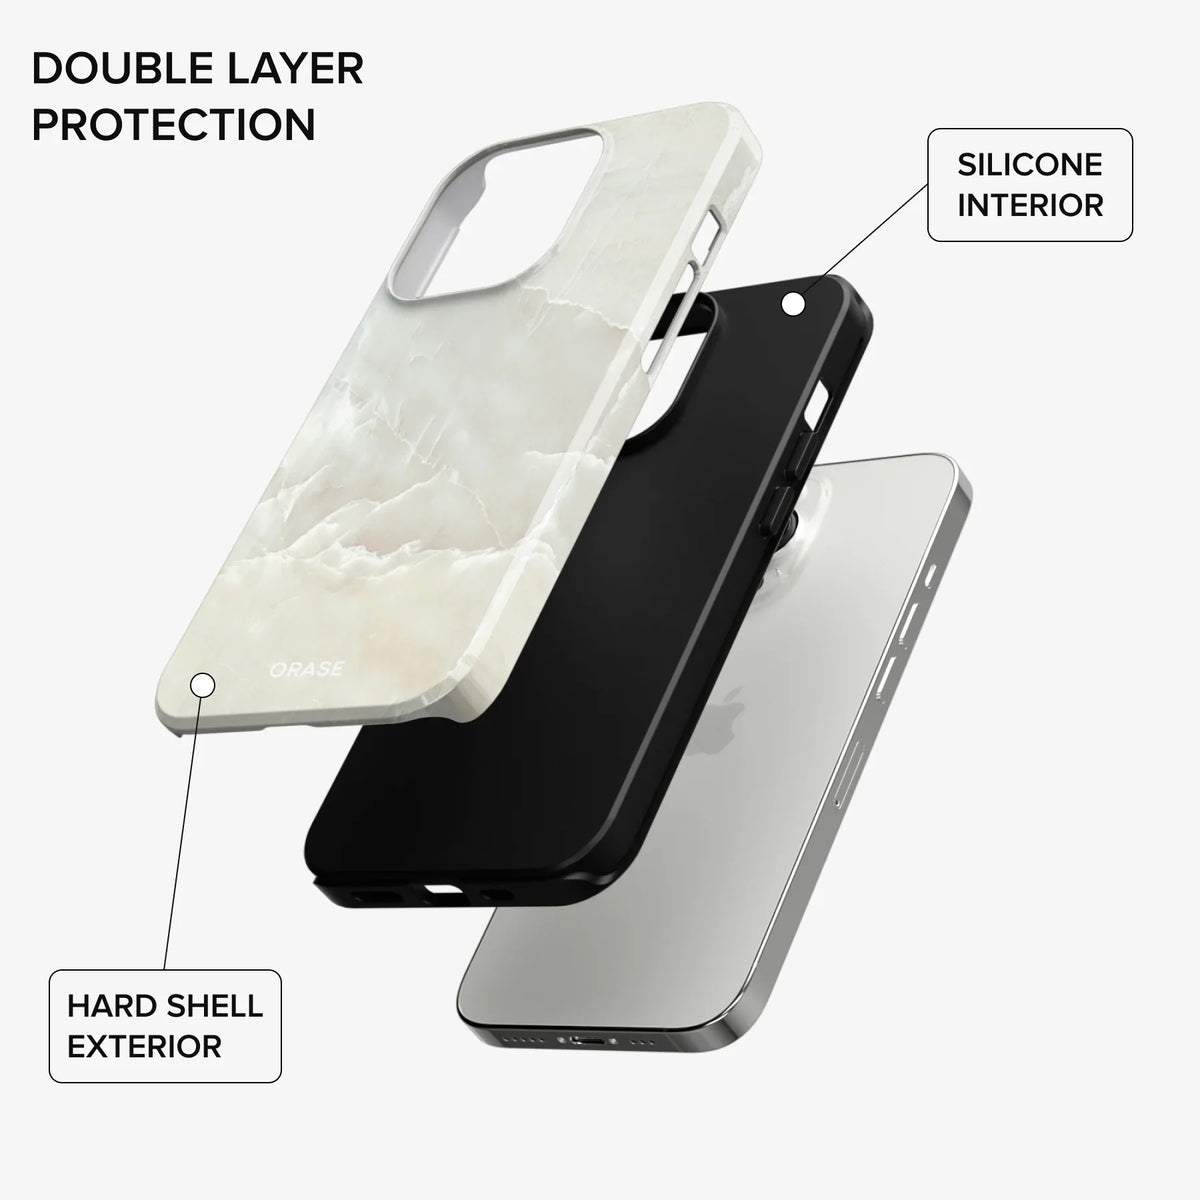 Ivory Marble iPhone Case - iPhone 11 Pro Max